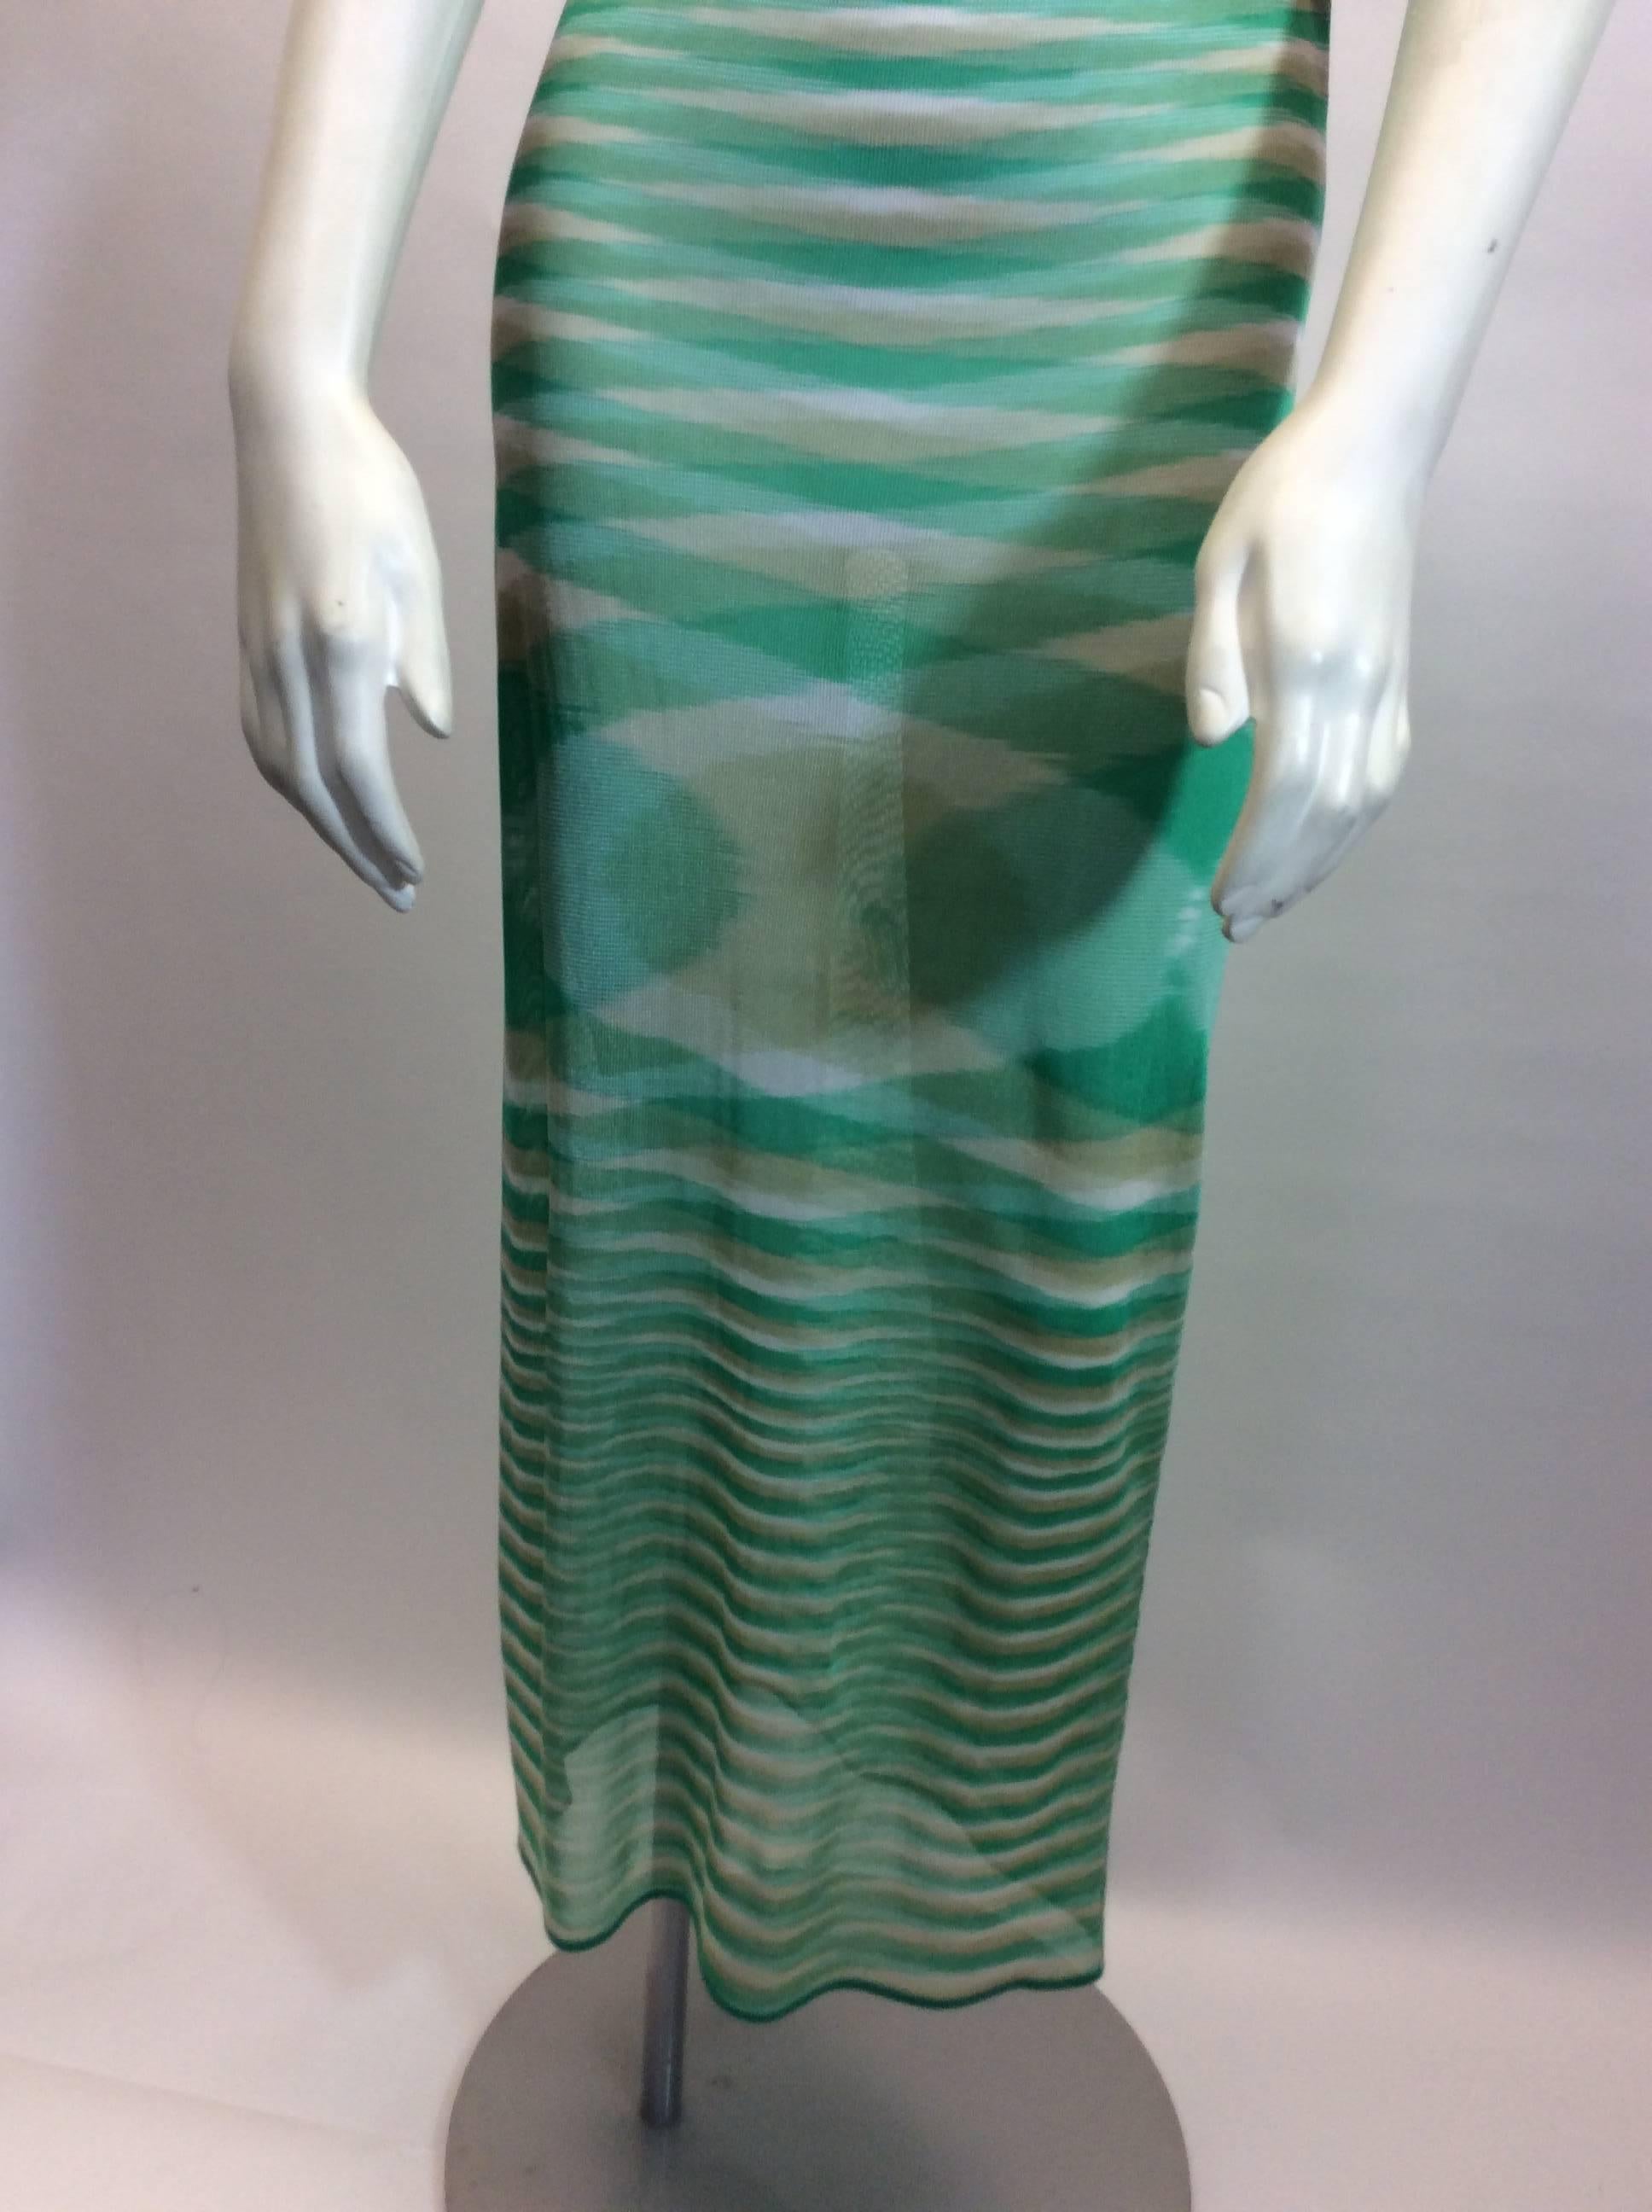 Missoni Knit Low Back Striped Dress In Excellent Condition For Sale In Narberth, PA